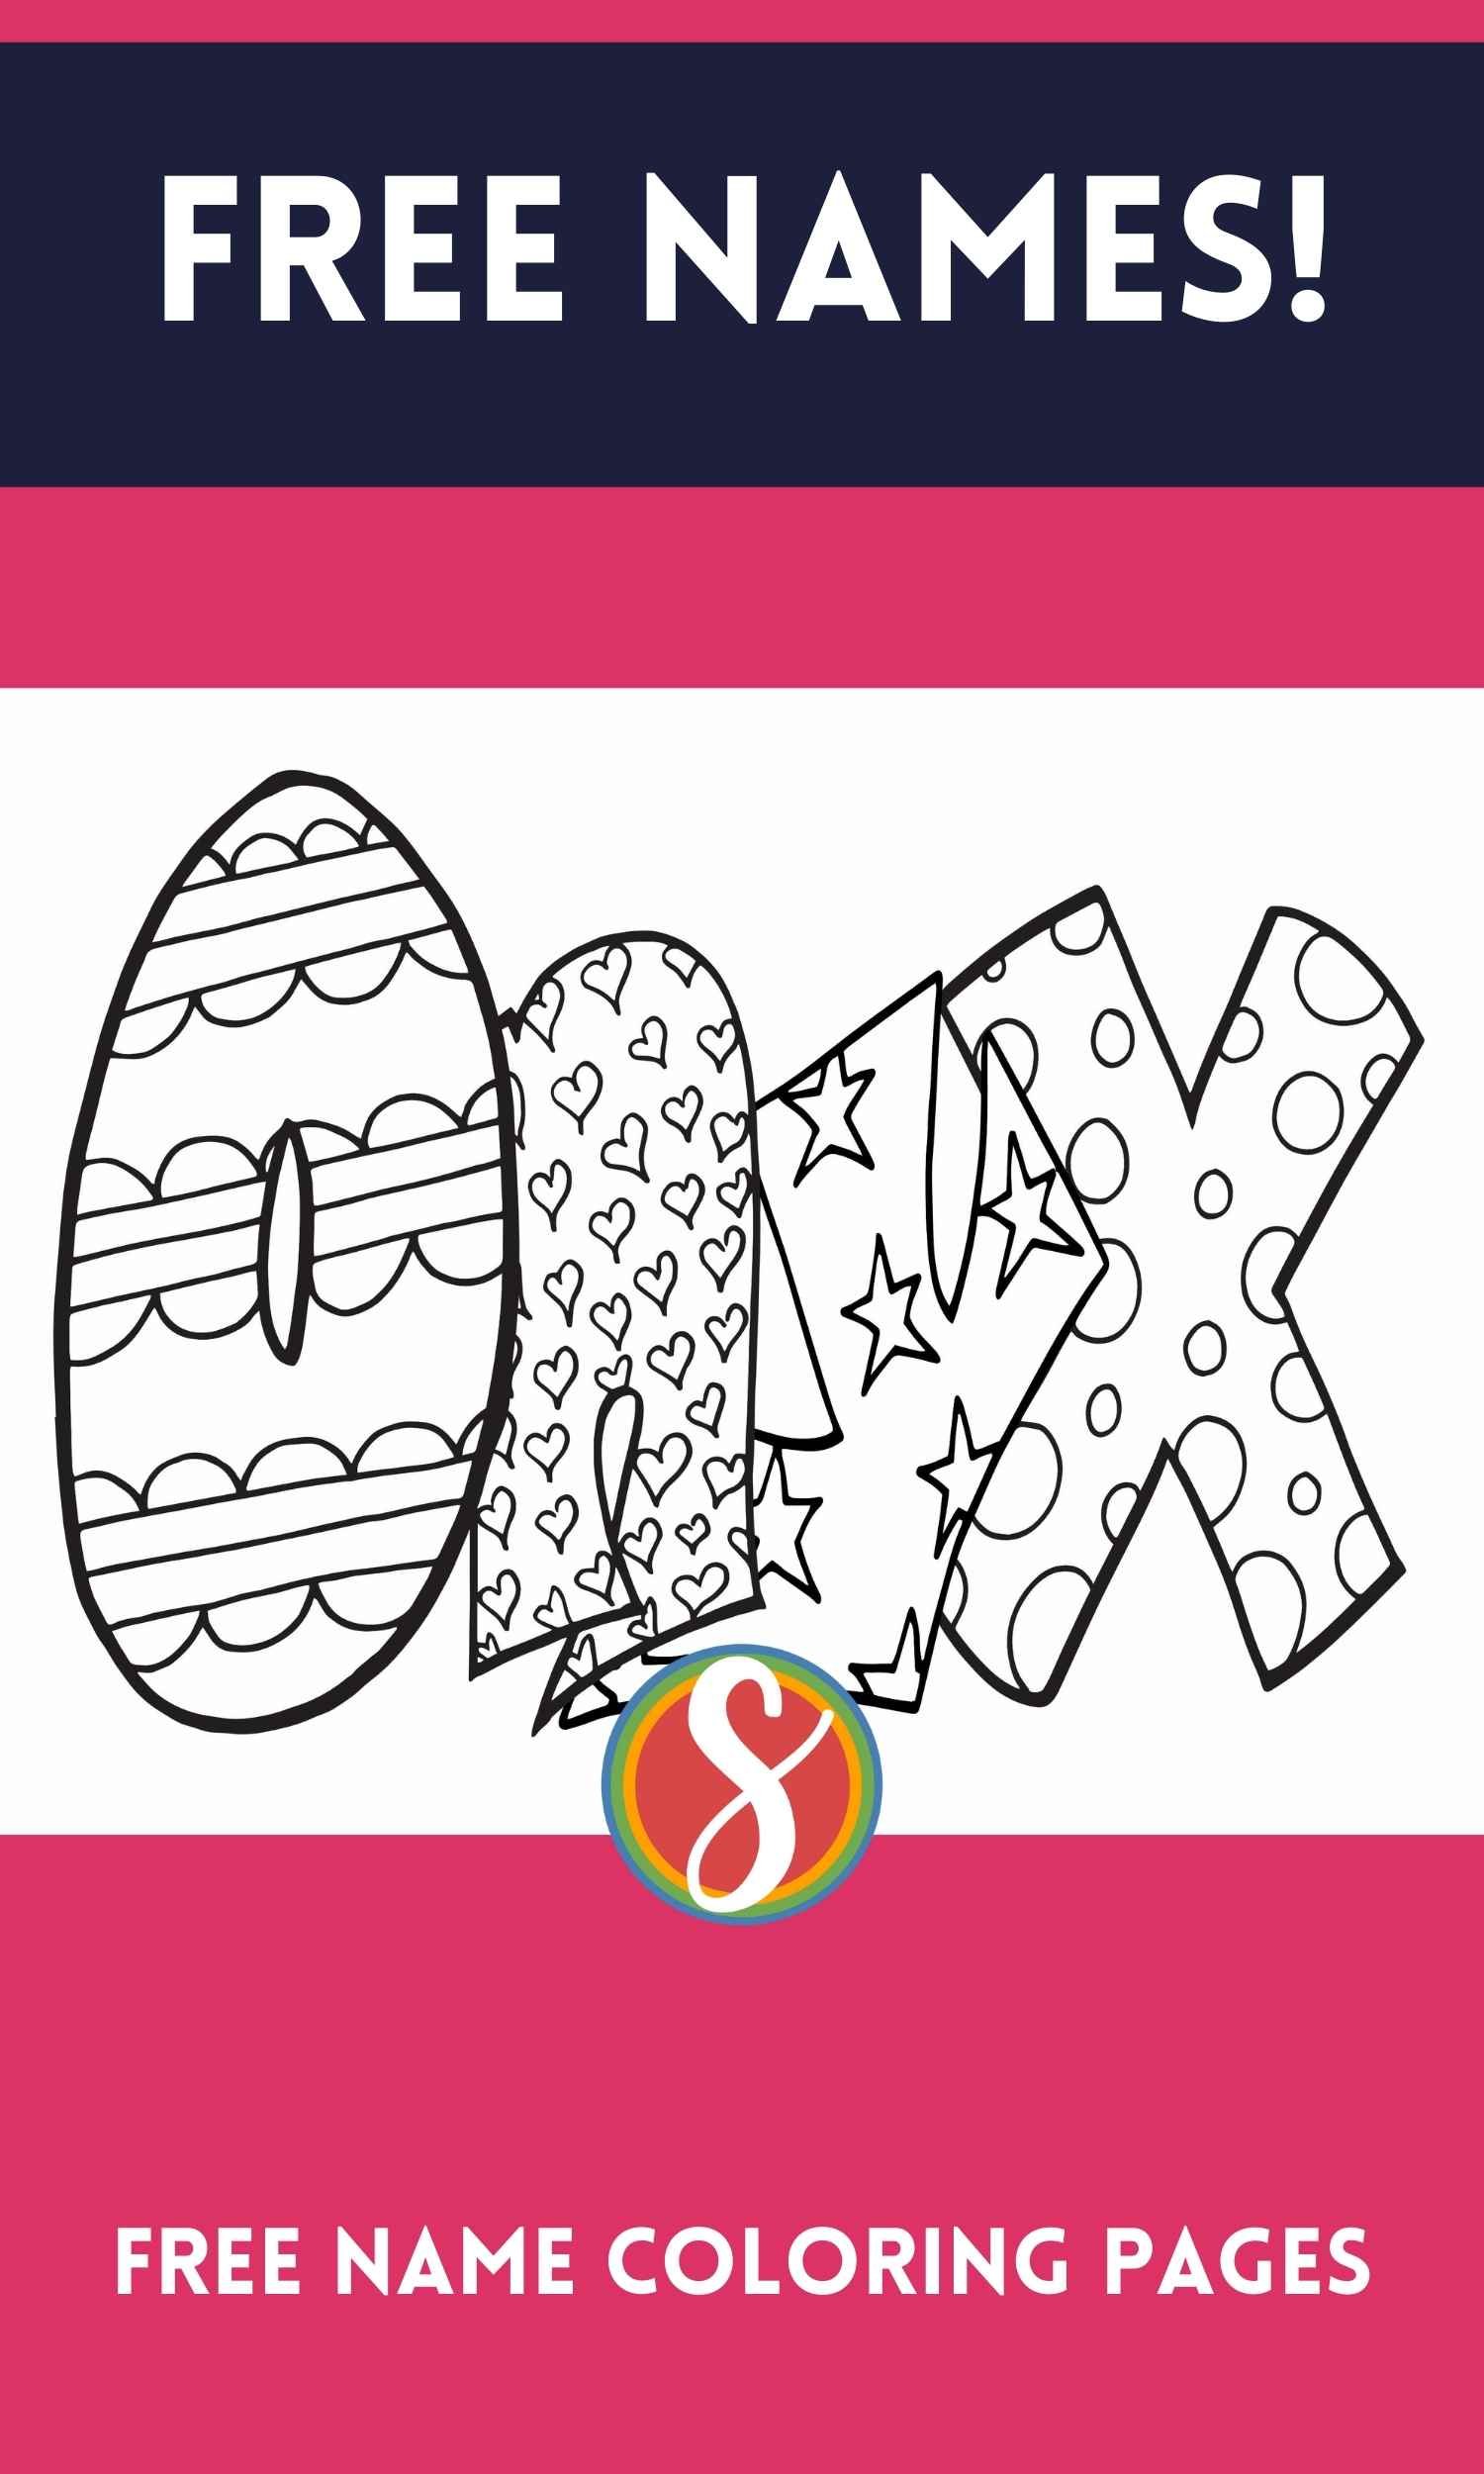 Onix Coloring Pages - Free Printable Coloring Pages for Kids